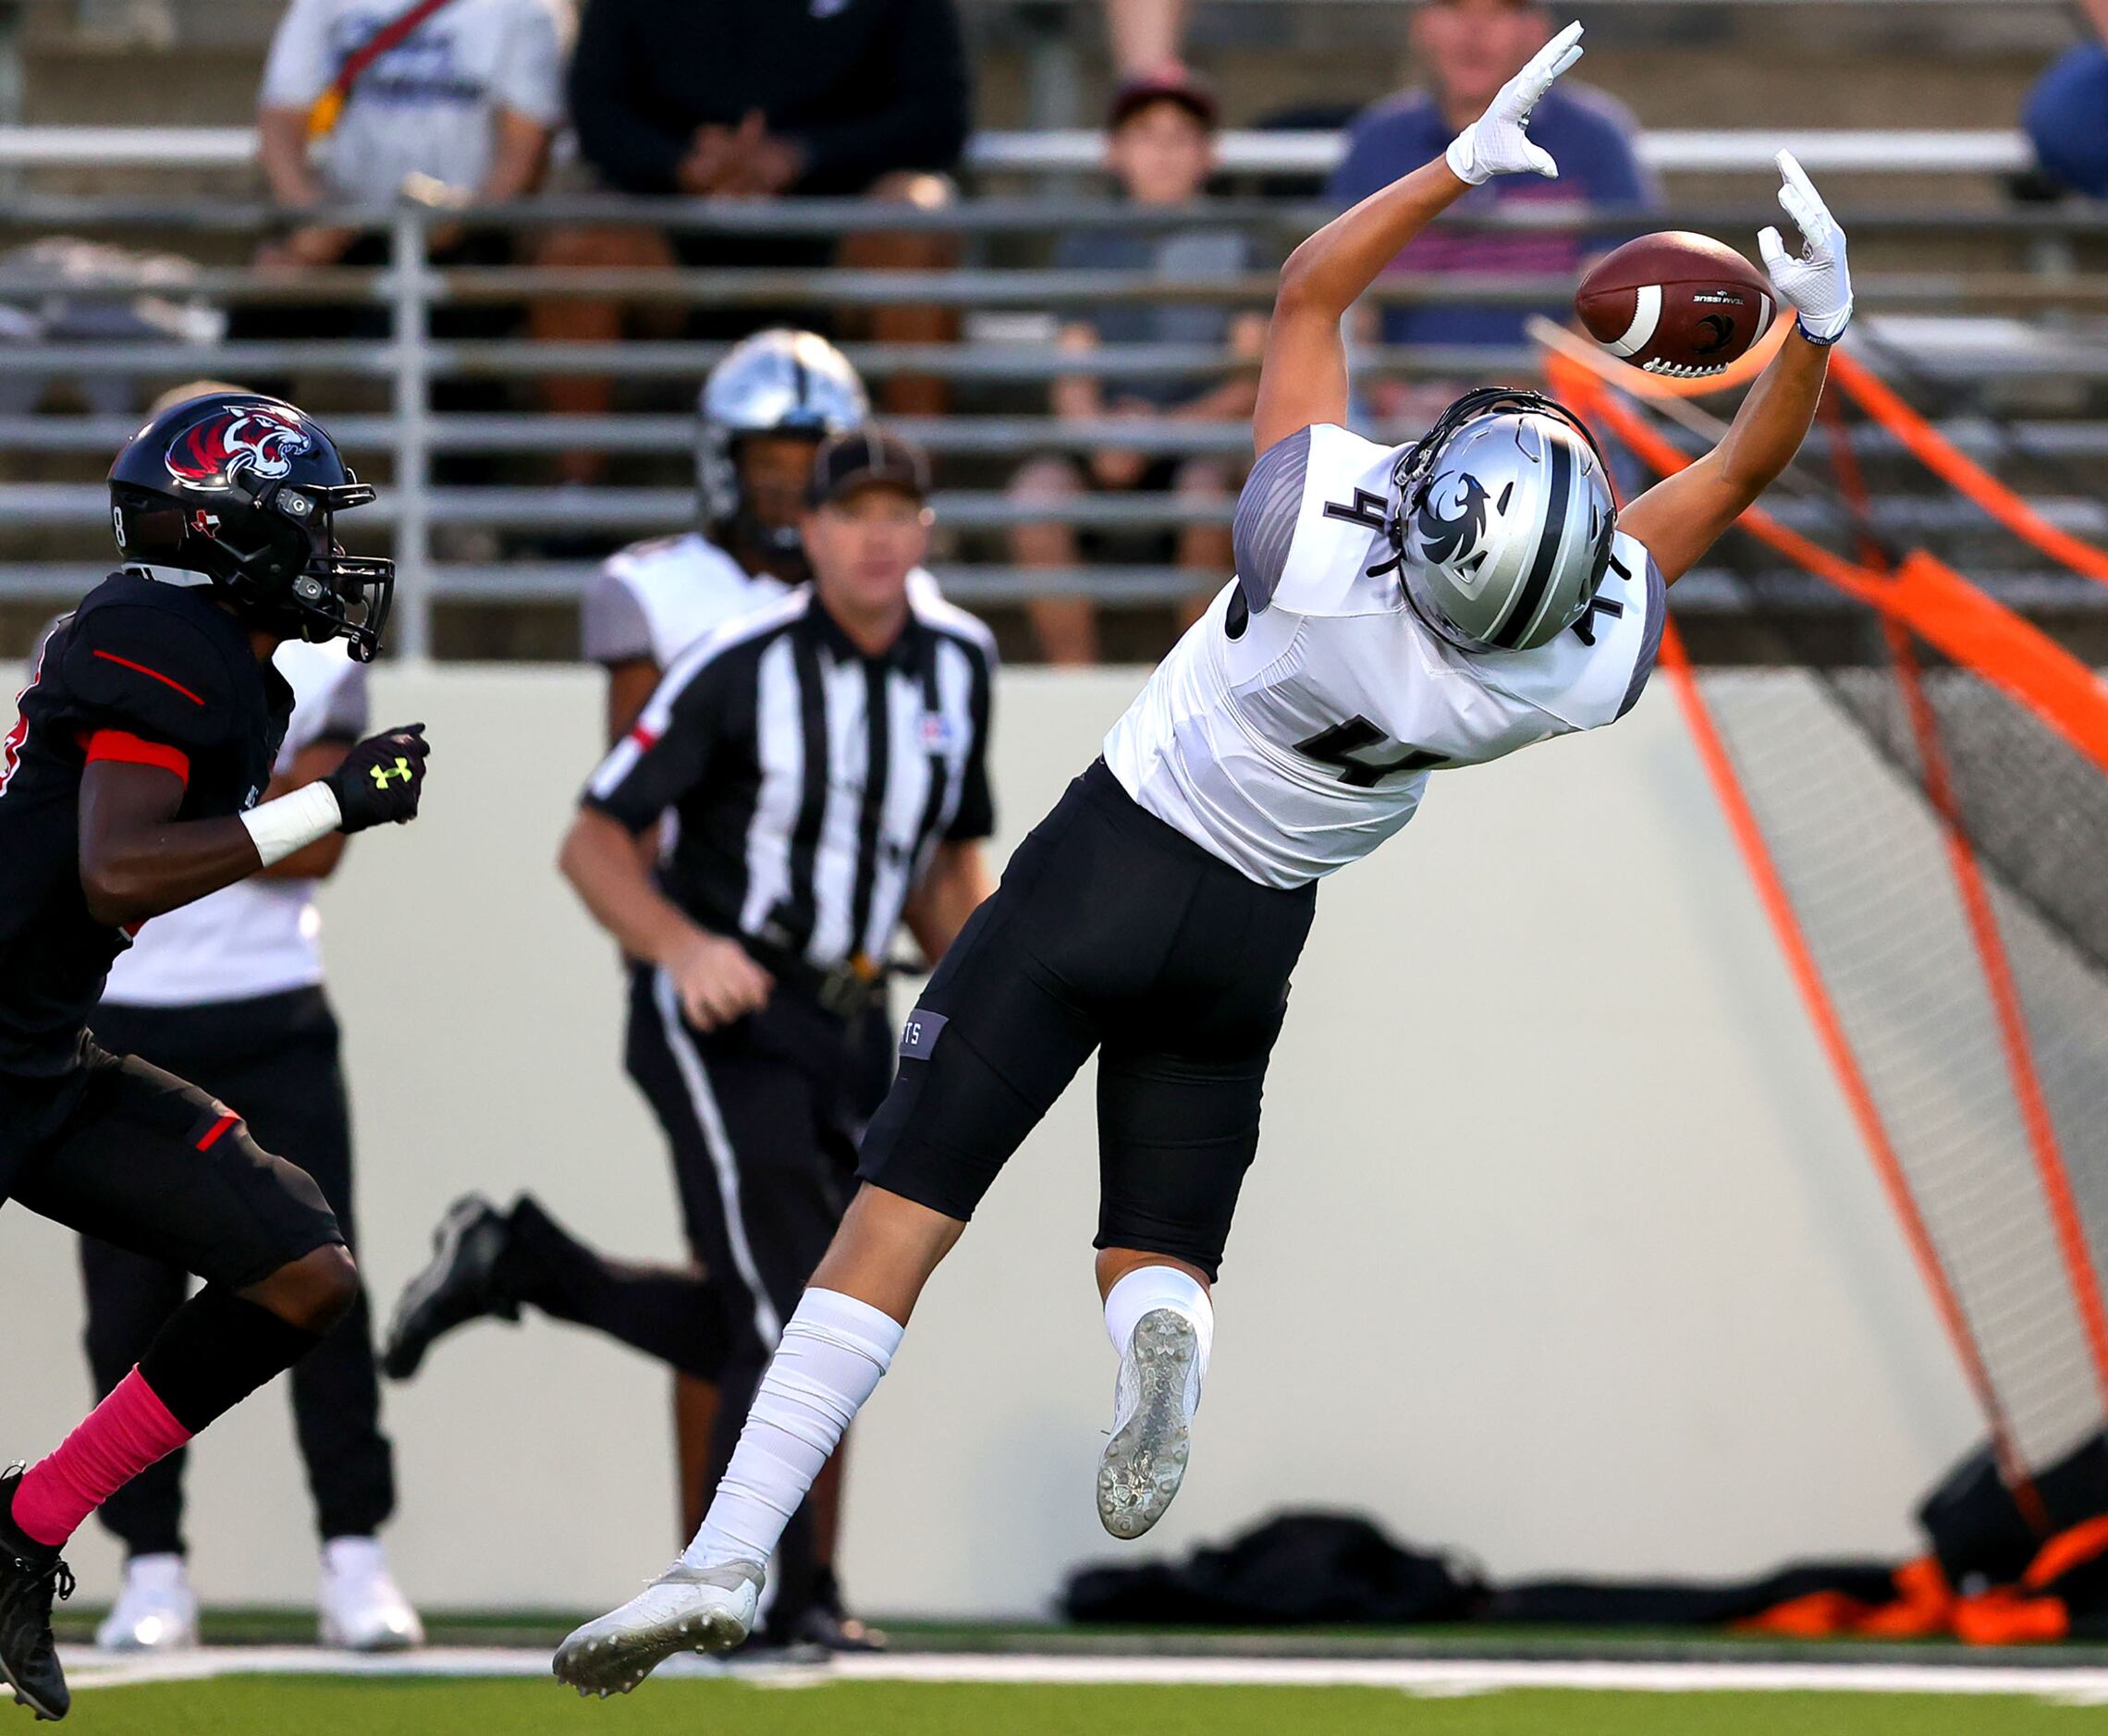 Denton Guyer wide receiver Brody Noble (4) tries to come up with a reception against Denton...